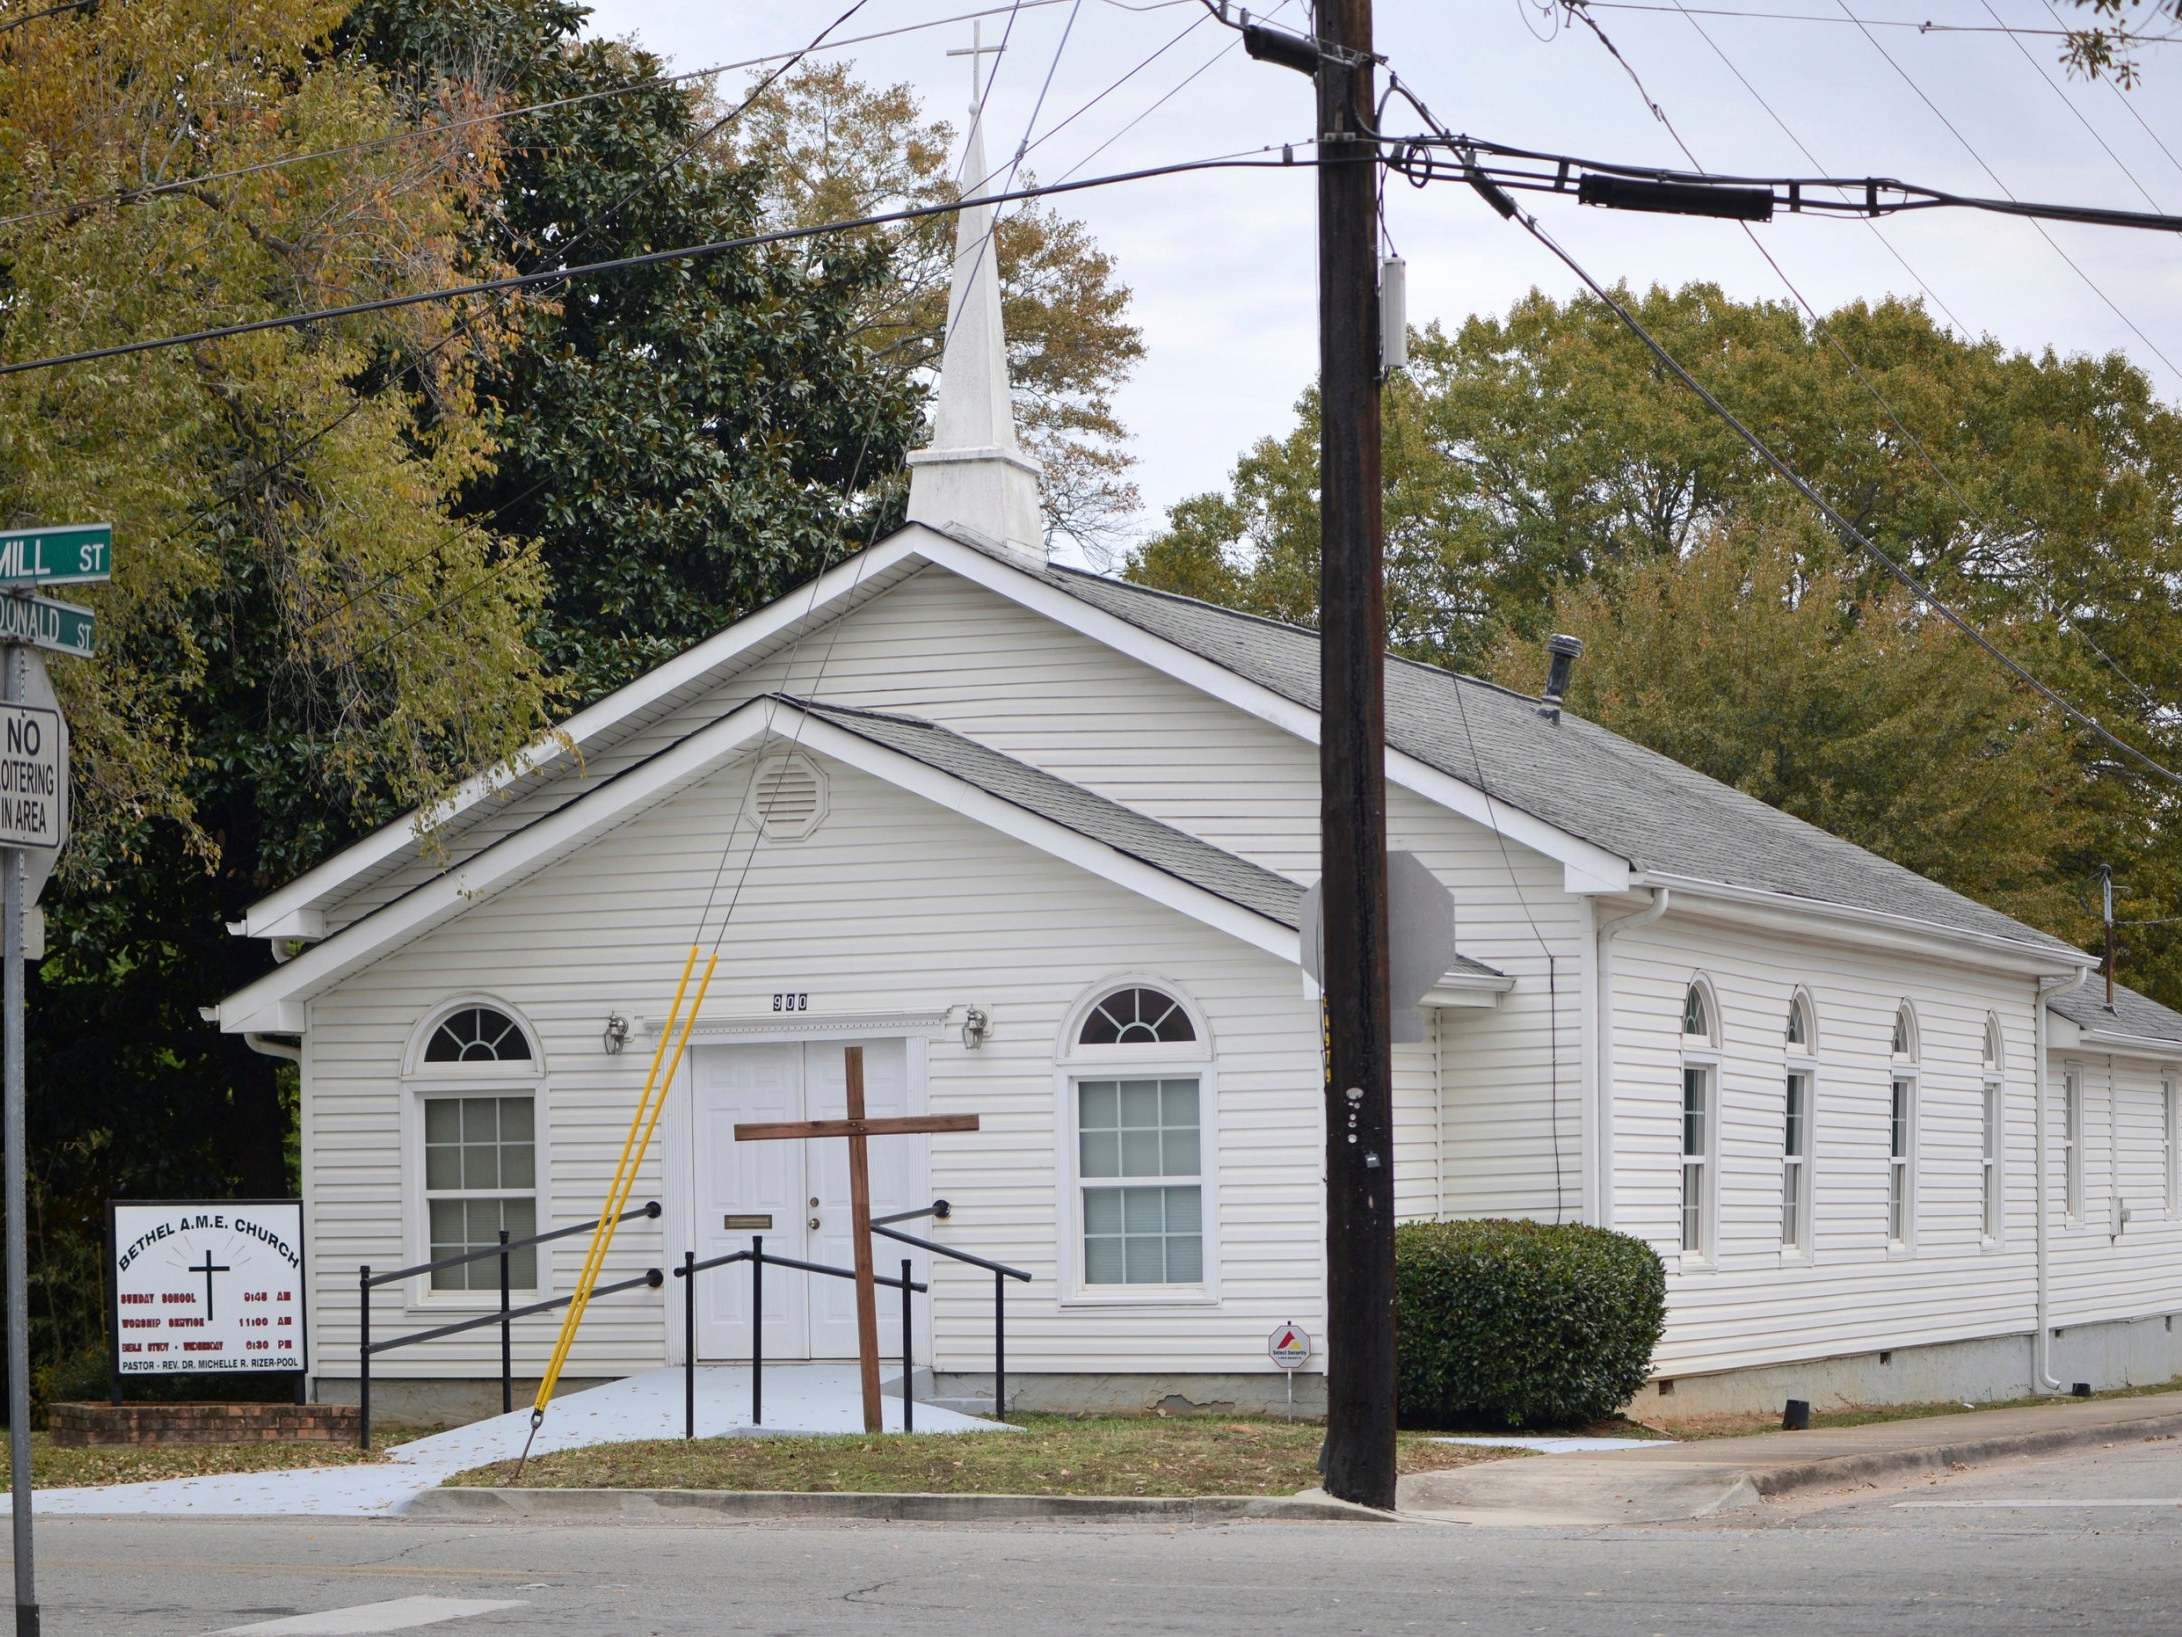 The teenager was plotting to harm multiple people at Bethel African Methodist Episcopal Church, Georgia, police say